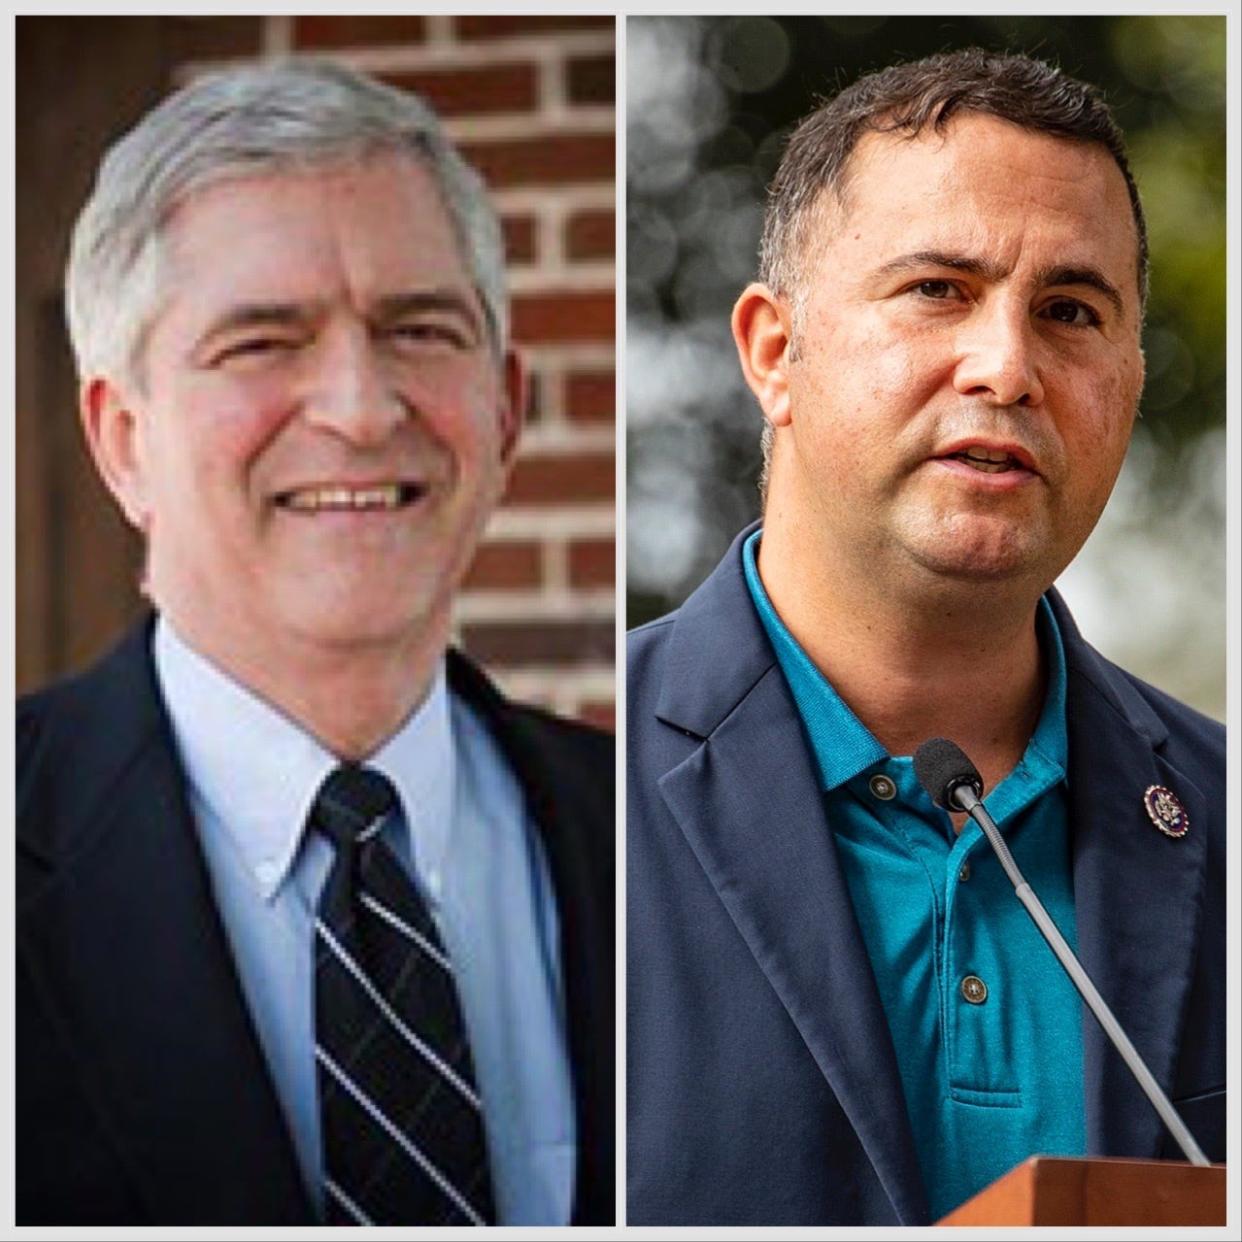 U.S. Reps. Dan Webster, left, and Darren Soto, right, whose districts include parts of Polk County, have attracted several challengers for next year's election.